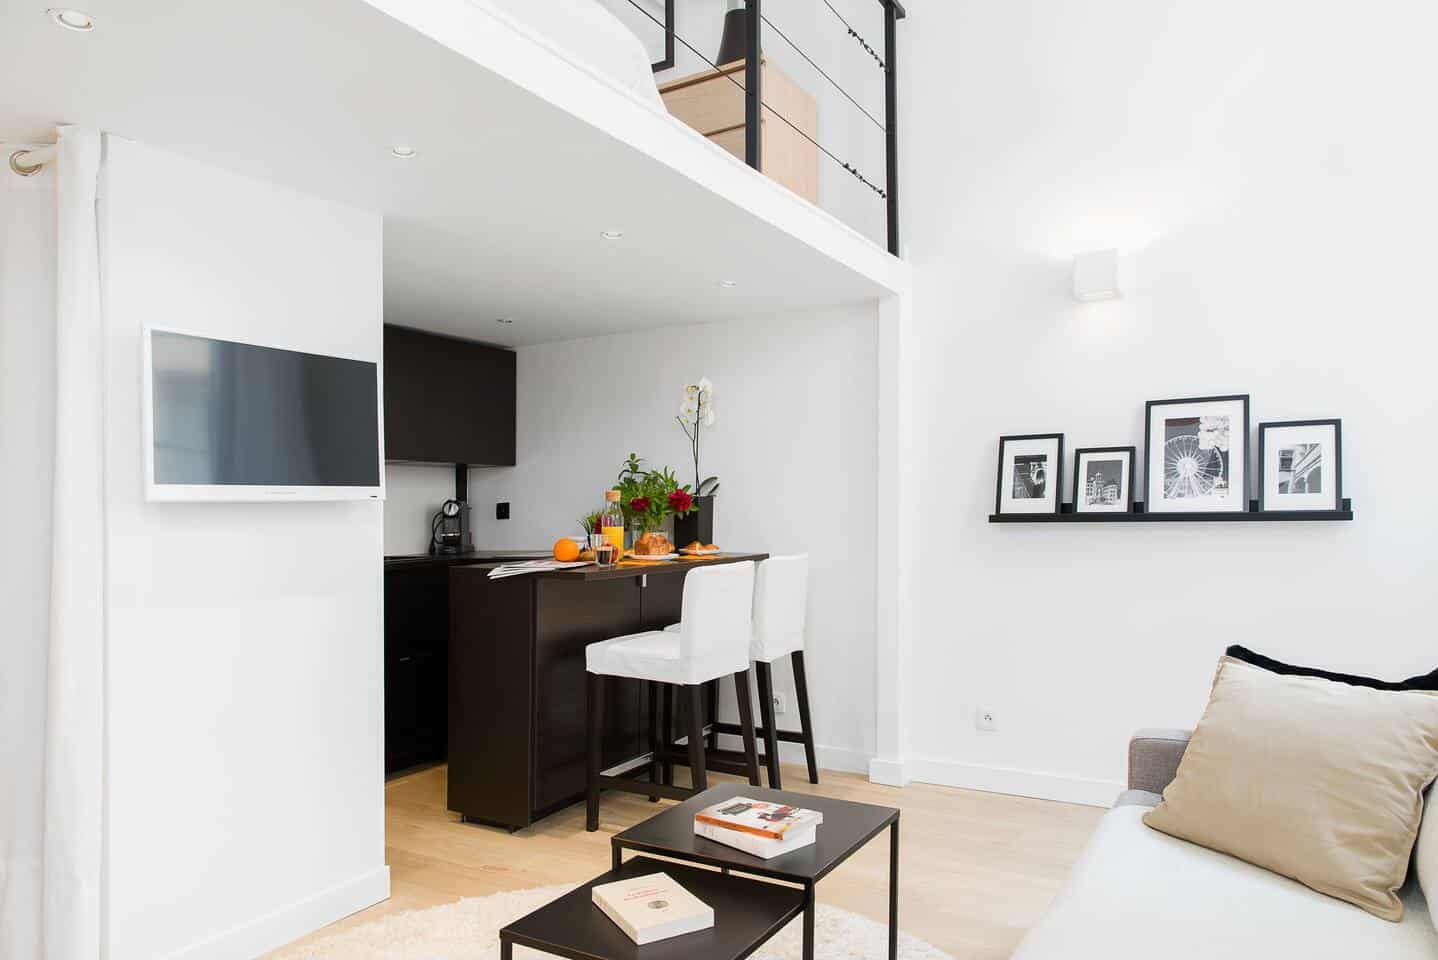 Image of Airbnb rental in Lyon, France